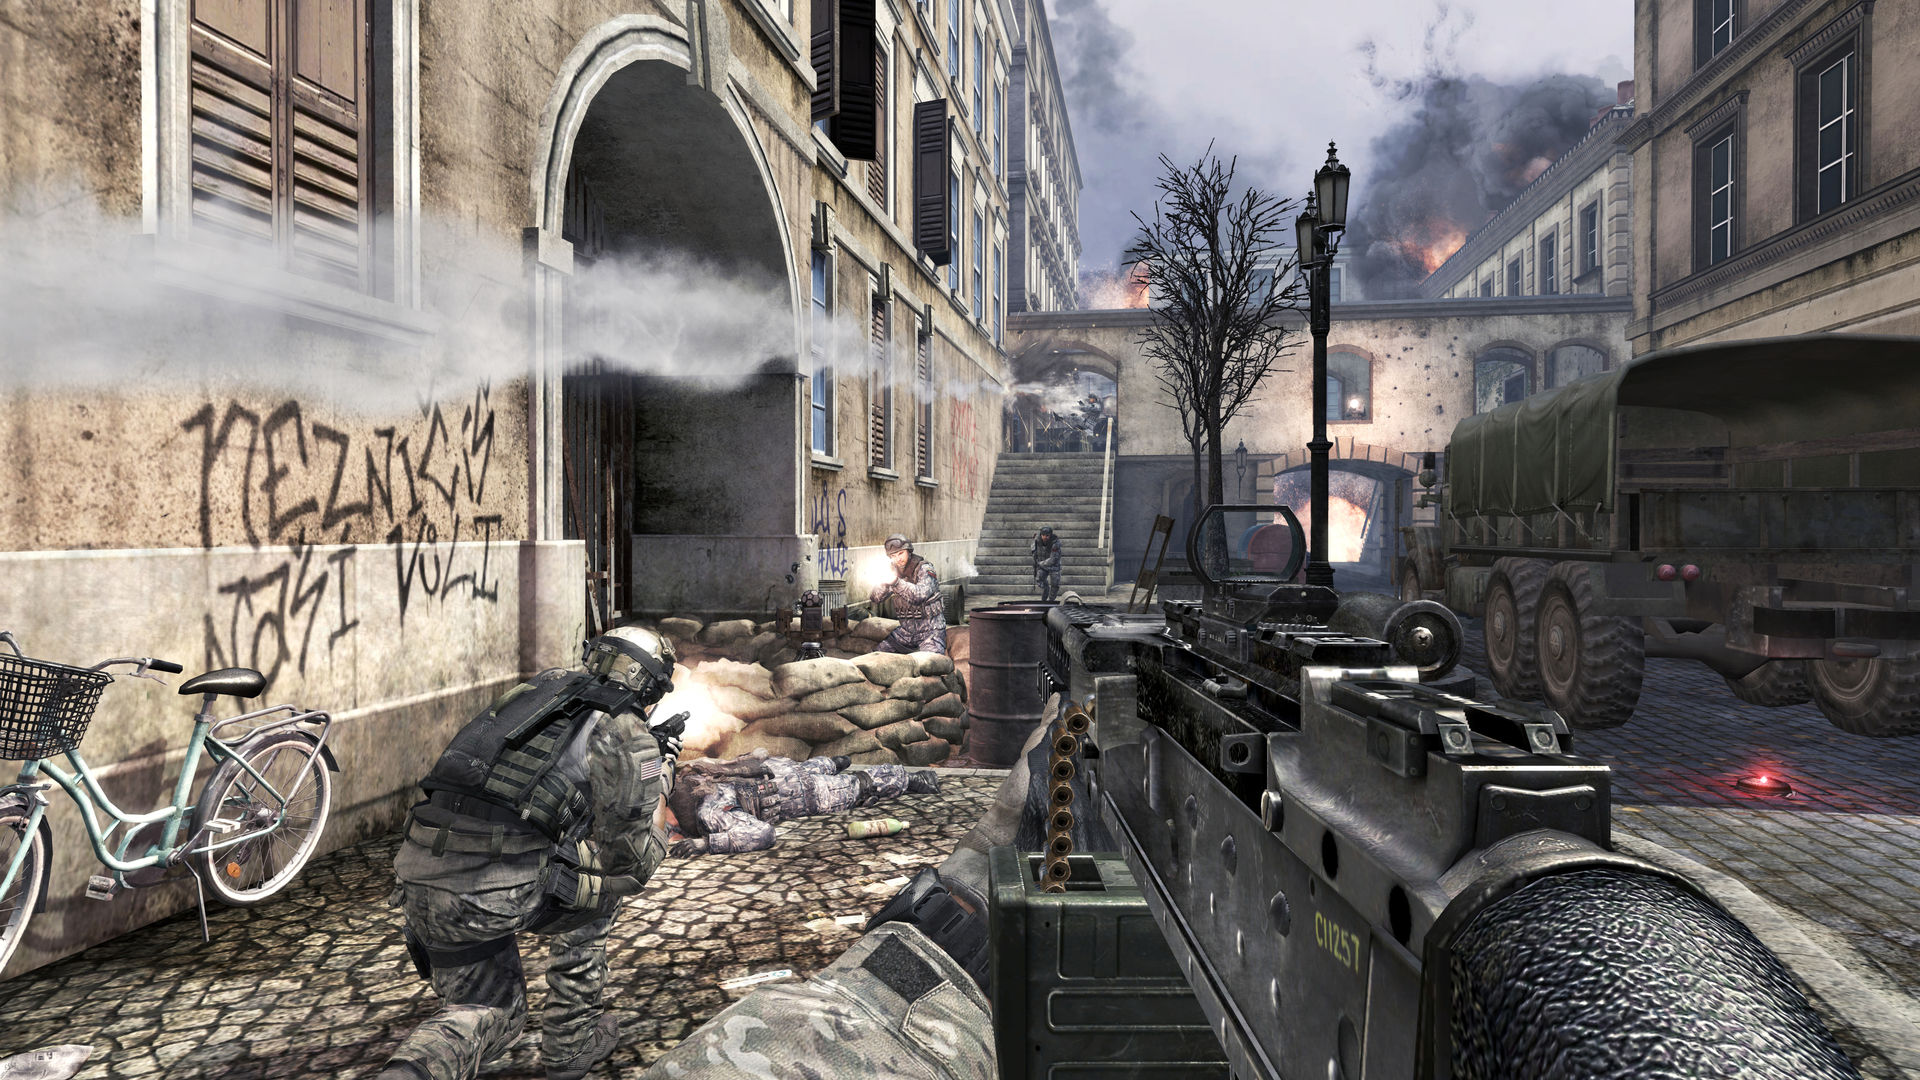 Call of Duty Modern Warfare 3 Full System Requirements